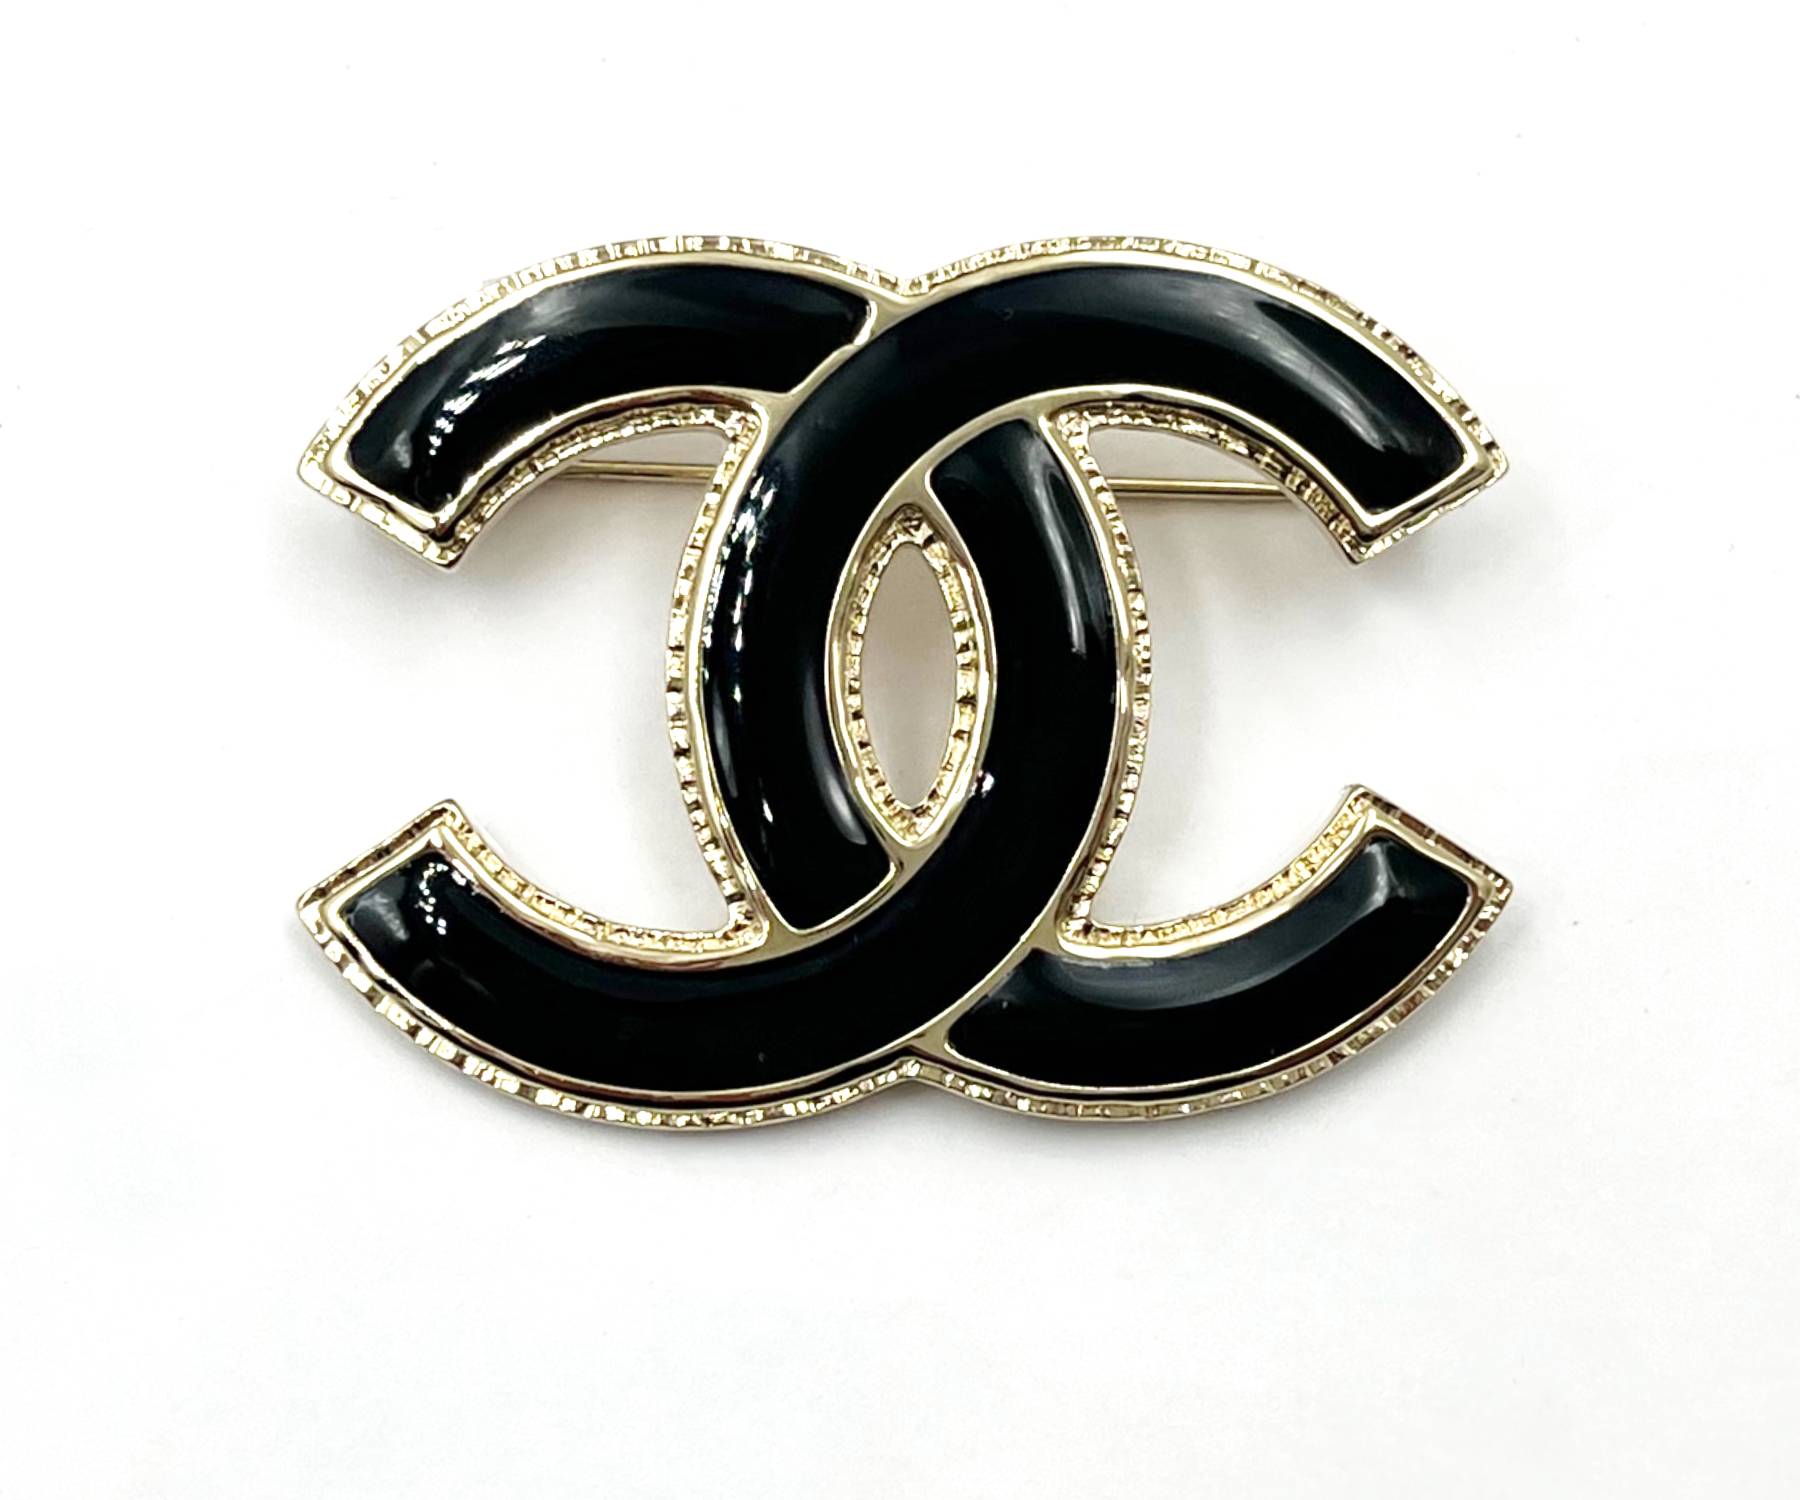 Rare CHANEL Black Resin & Crystals Outer Space Brooch Pin, Atomic